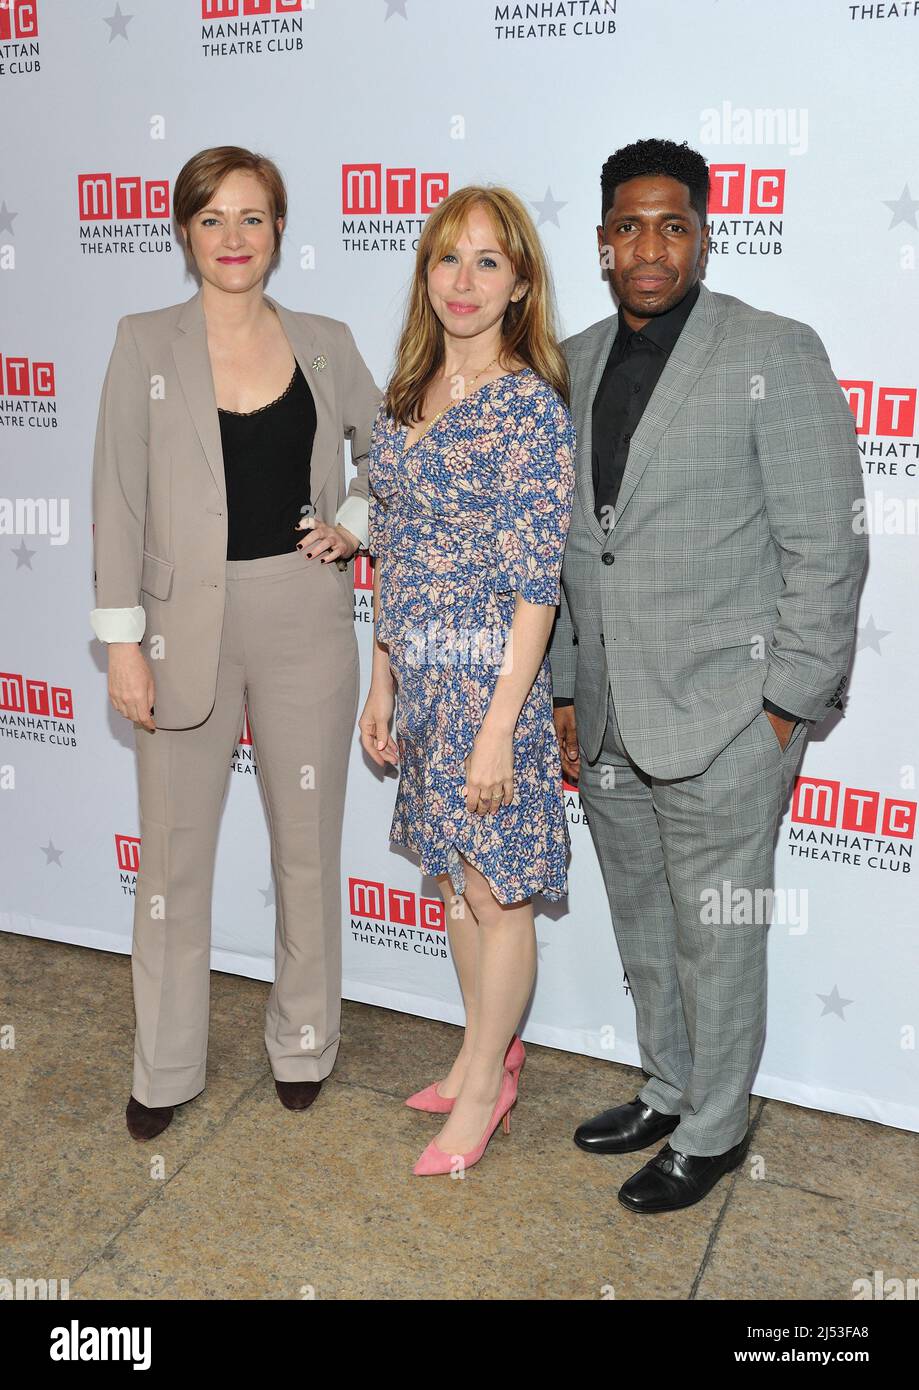 New York, USA. 19th Apr, 2022. L-R: Suzy Jane Hunt, Emily Young and Charles Browning attend the Broadway opening night of How I Learned To Drive at the Samuel J. Friedman Theatre in New York, NY on April 19, 2022. (Photo by Stephen Smith/SIPA USA) Credit: Sipa USA/Alamy Live News Stock Photo